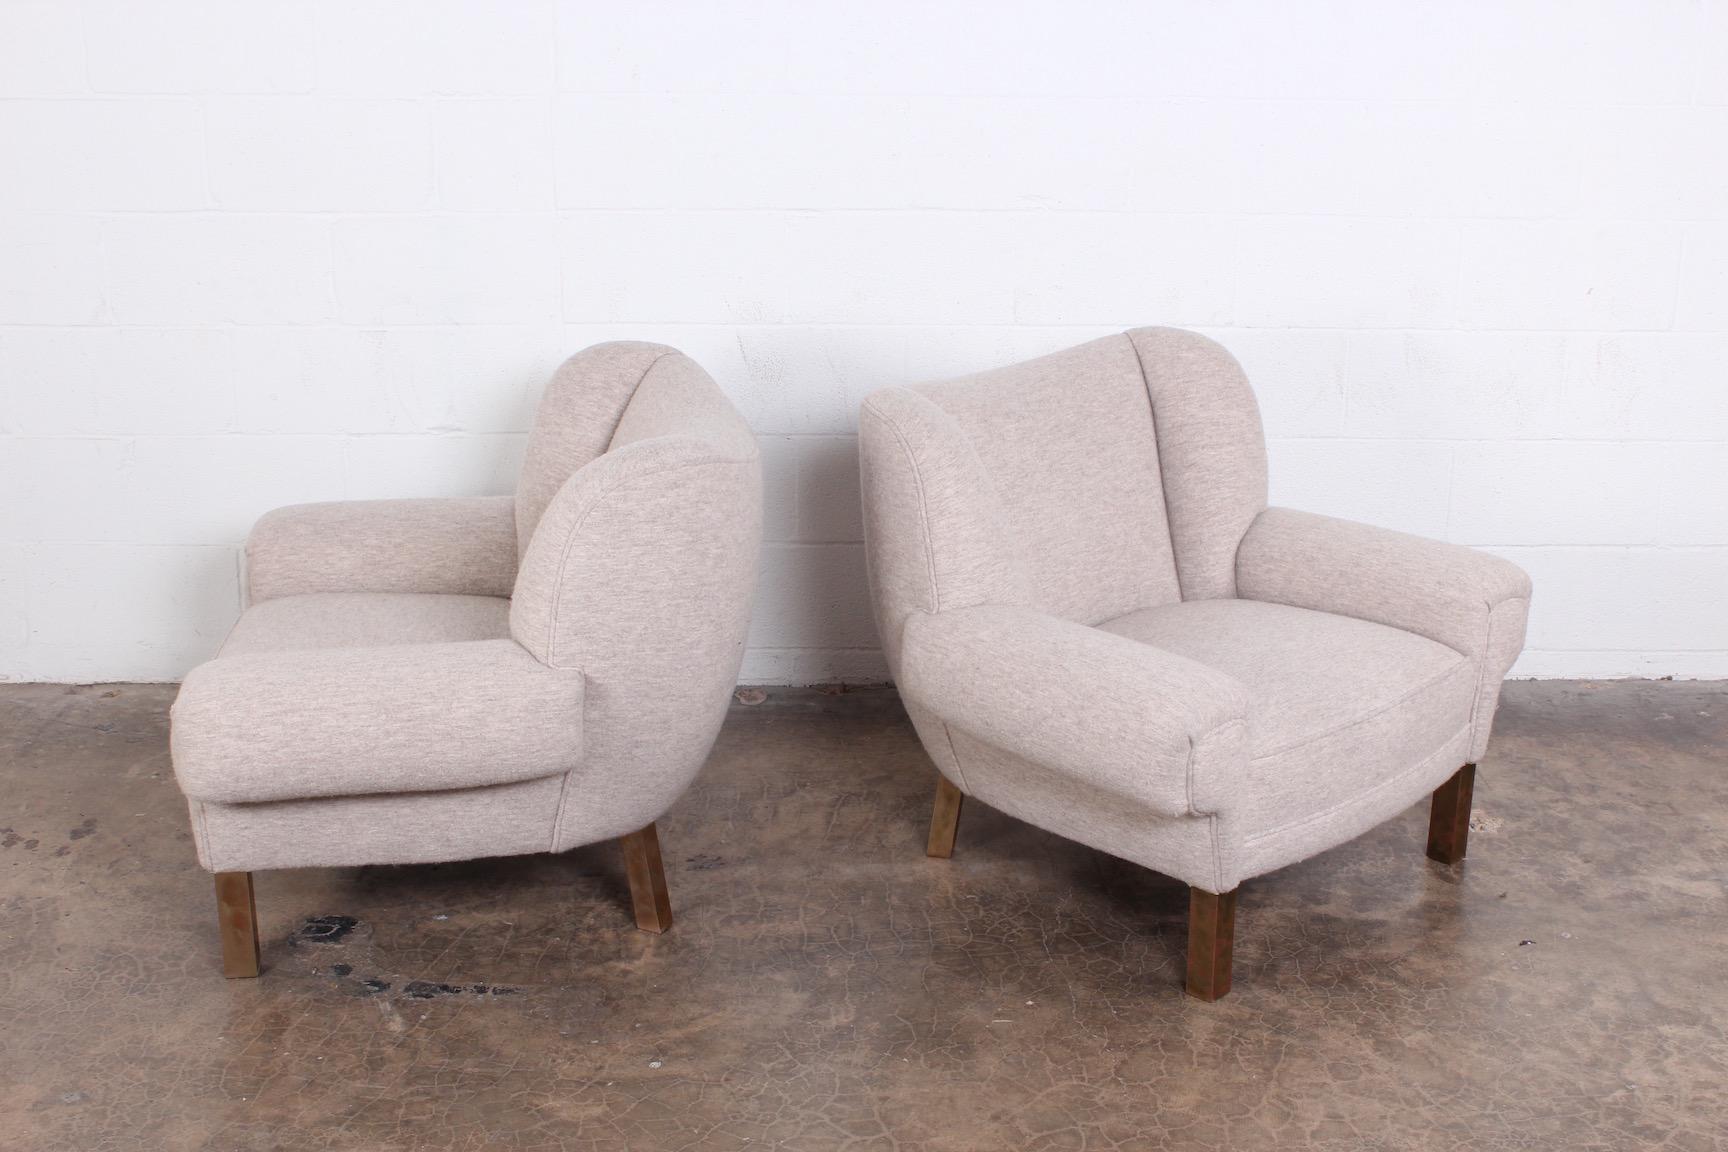 A rare pair of lounge chairs designed by Paul Laszlo for Herman Miller. Newer upholstery with original patinated brass legs.